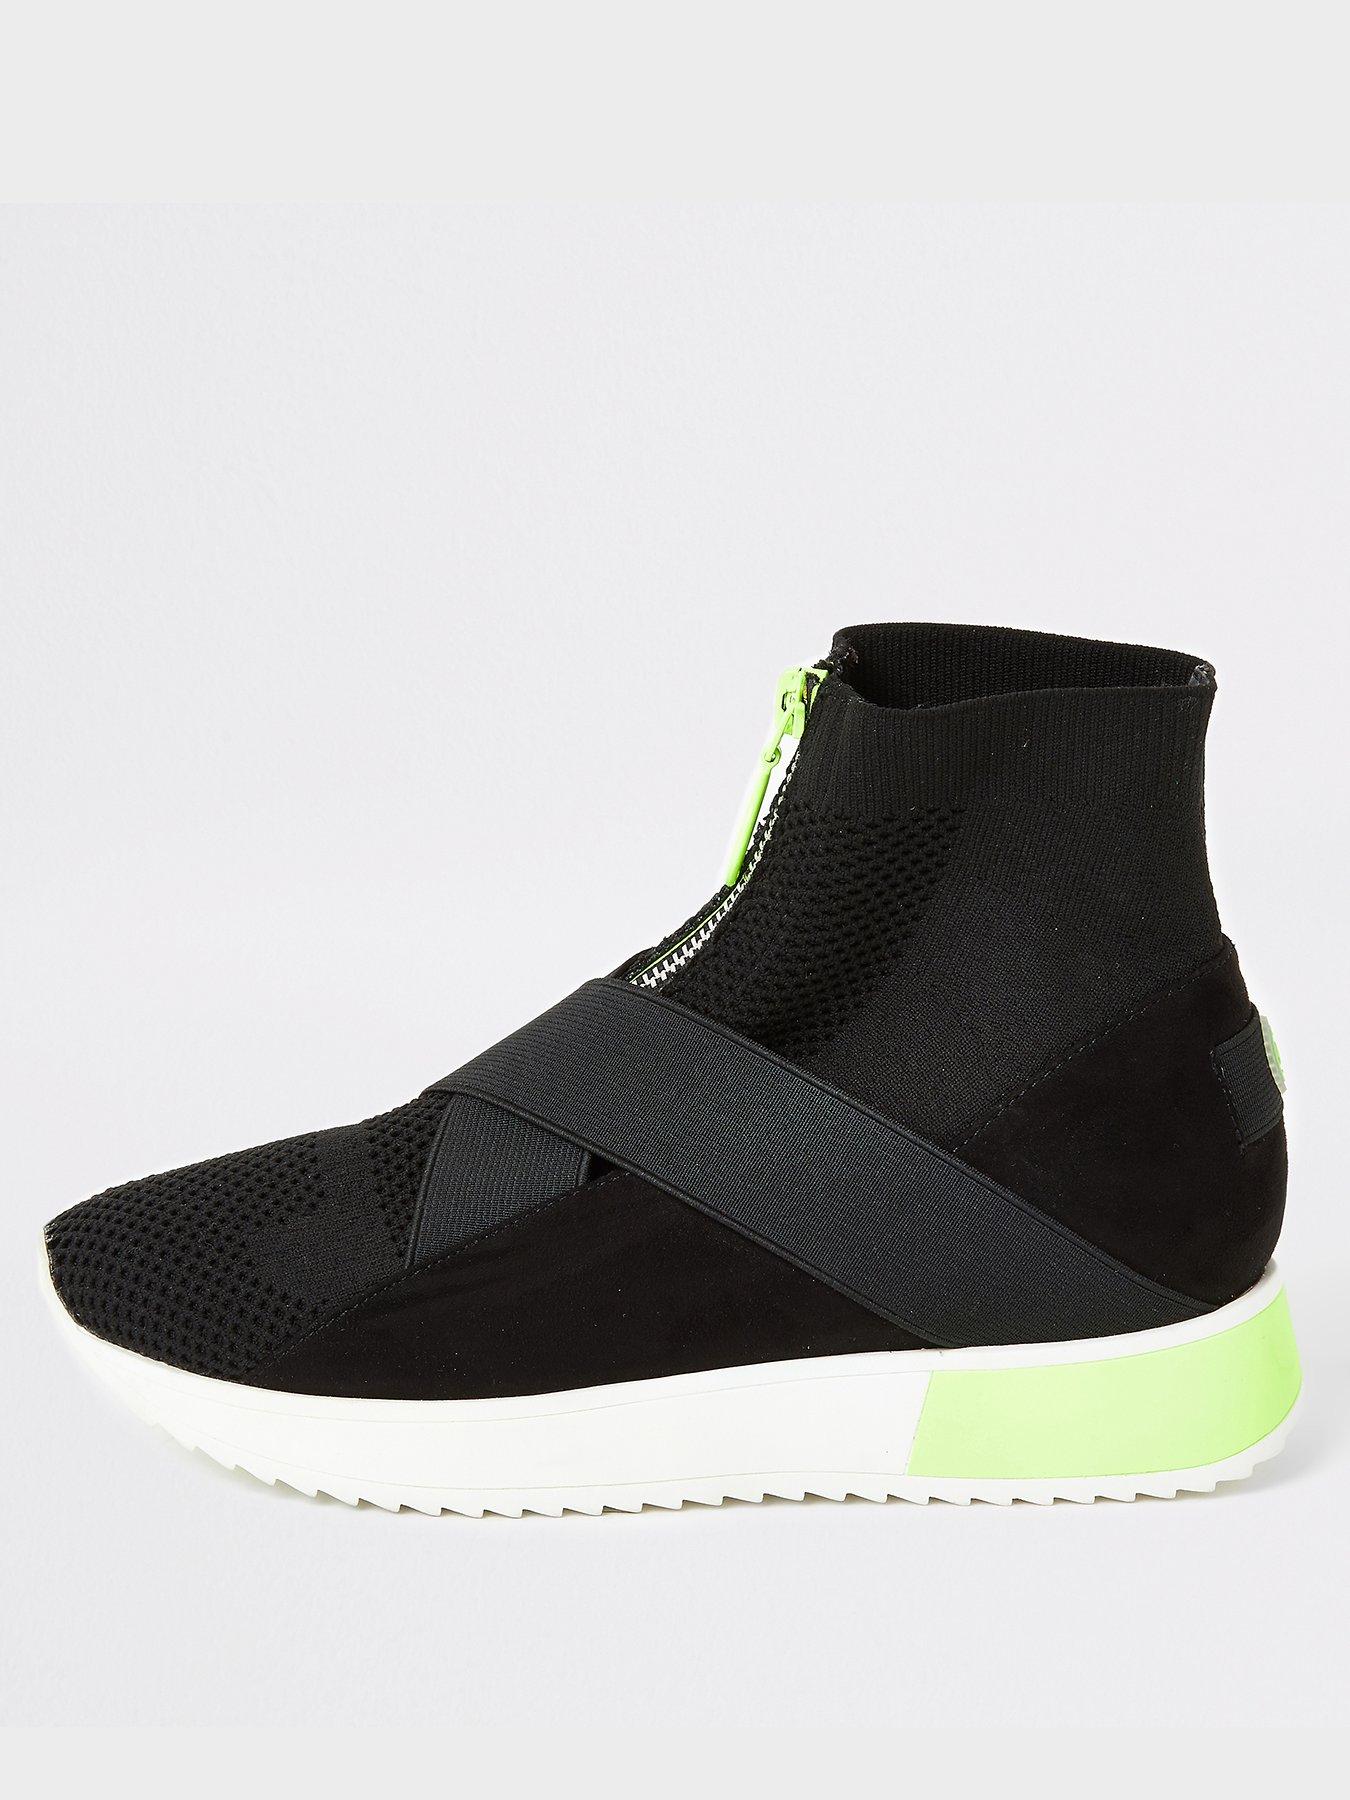 river island black knit runner trainers